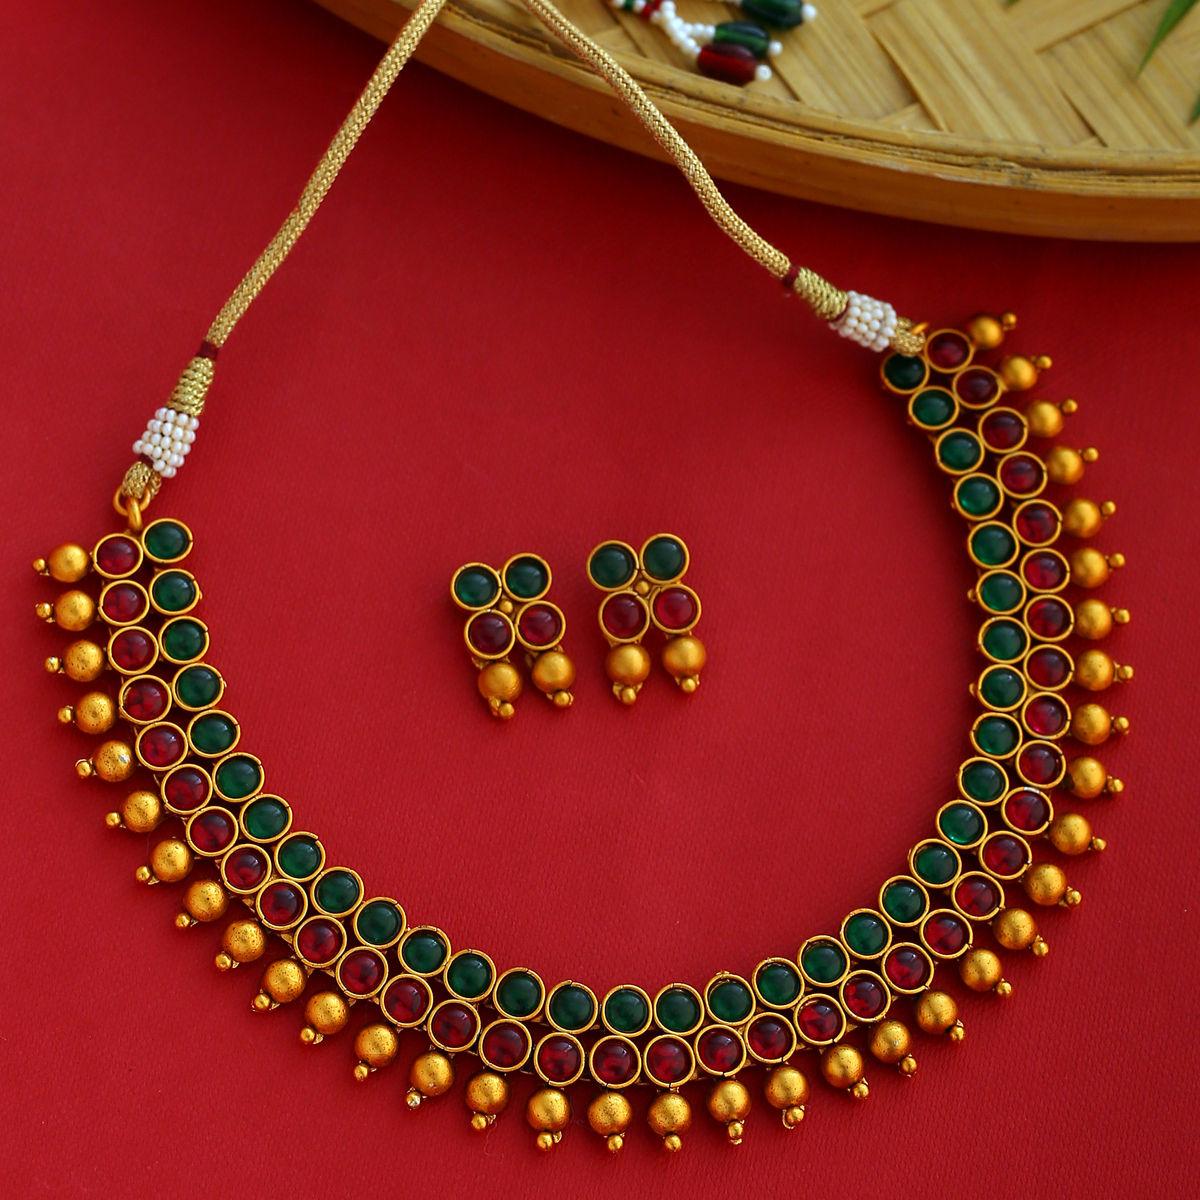 Gold collar necklace Egypt Cleopatra collar necklace Beaded green necklace  | eBay